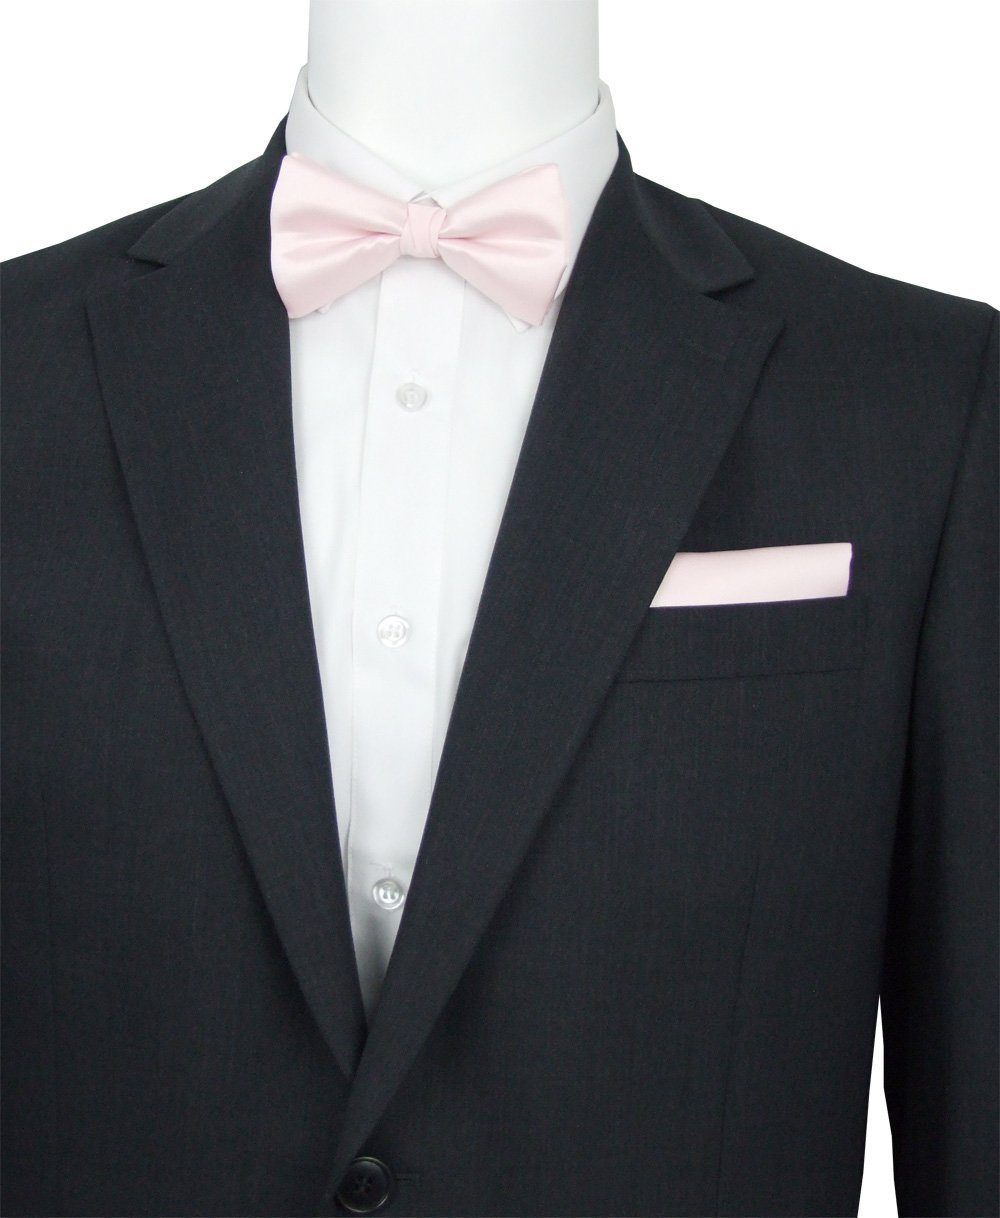 Shell Pink Bow Tie - Wedding